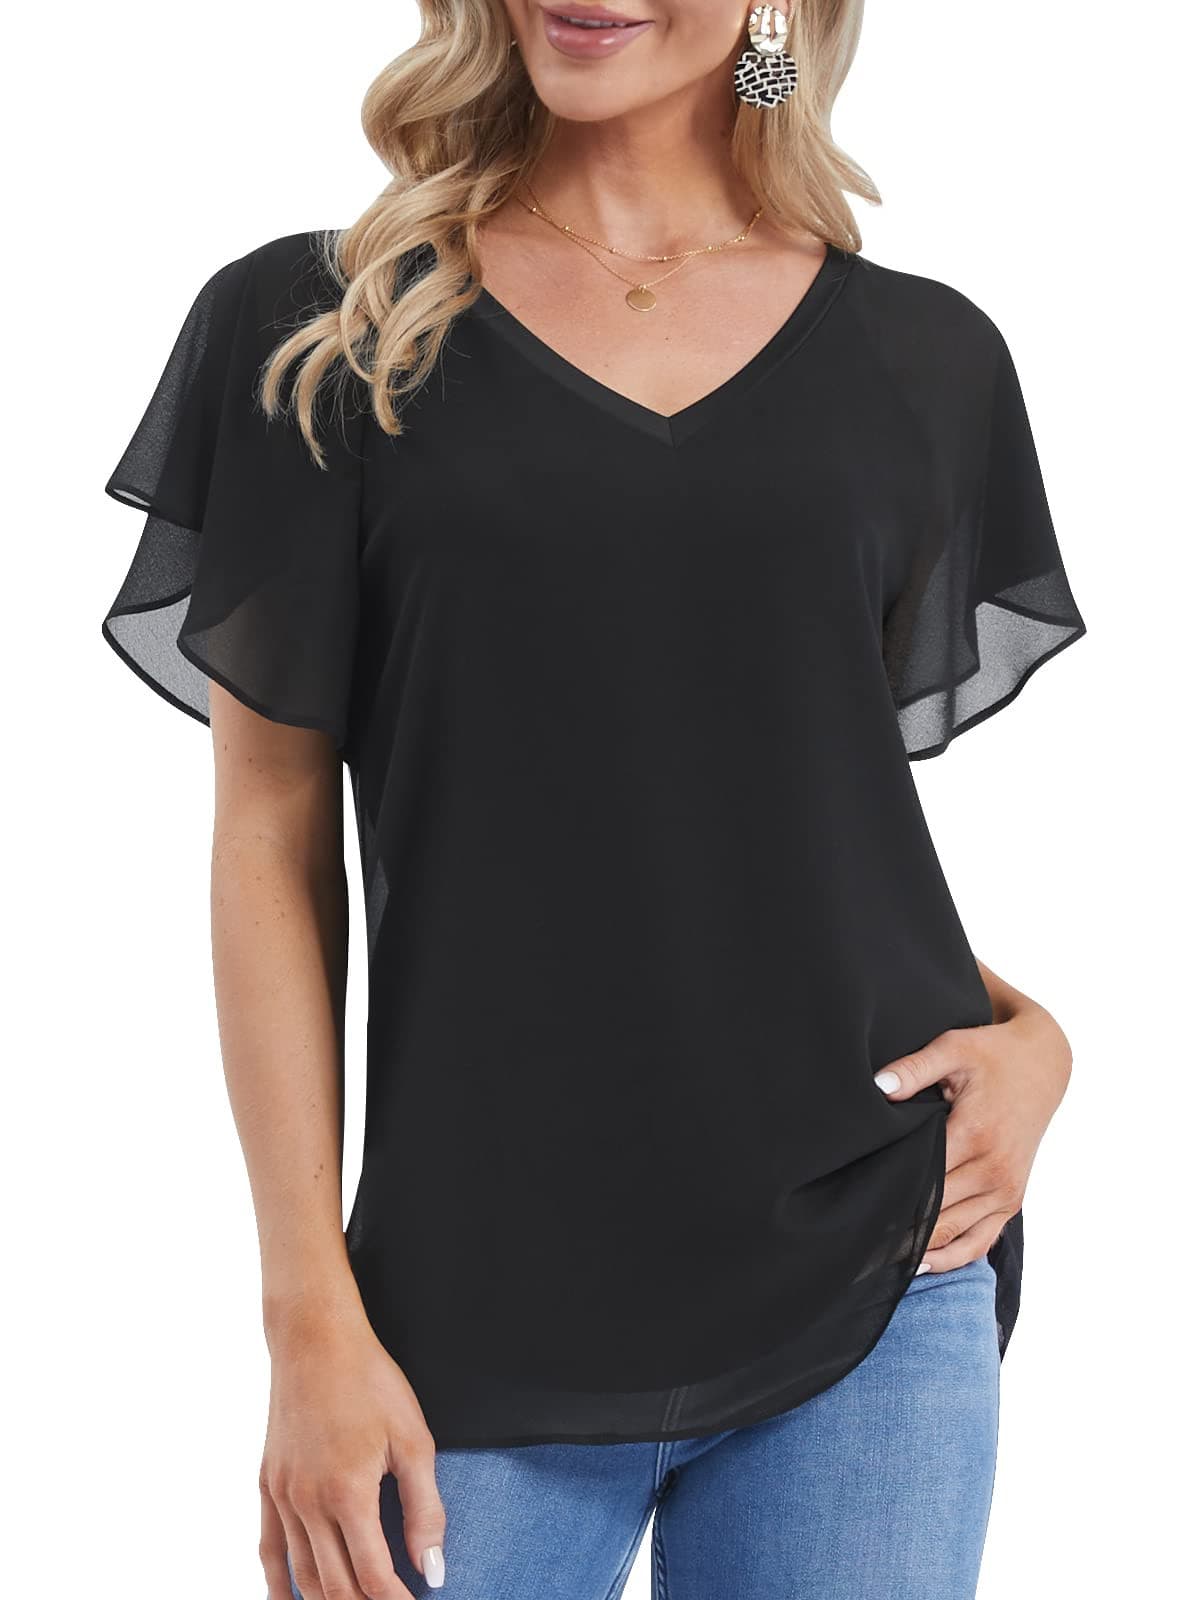 DJT Flare Ruffle Solid Black Womens Summer Chiffon Tops Casual V Neck Short Sleeve Flowy Top Blouses Shirts